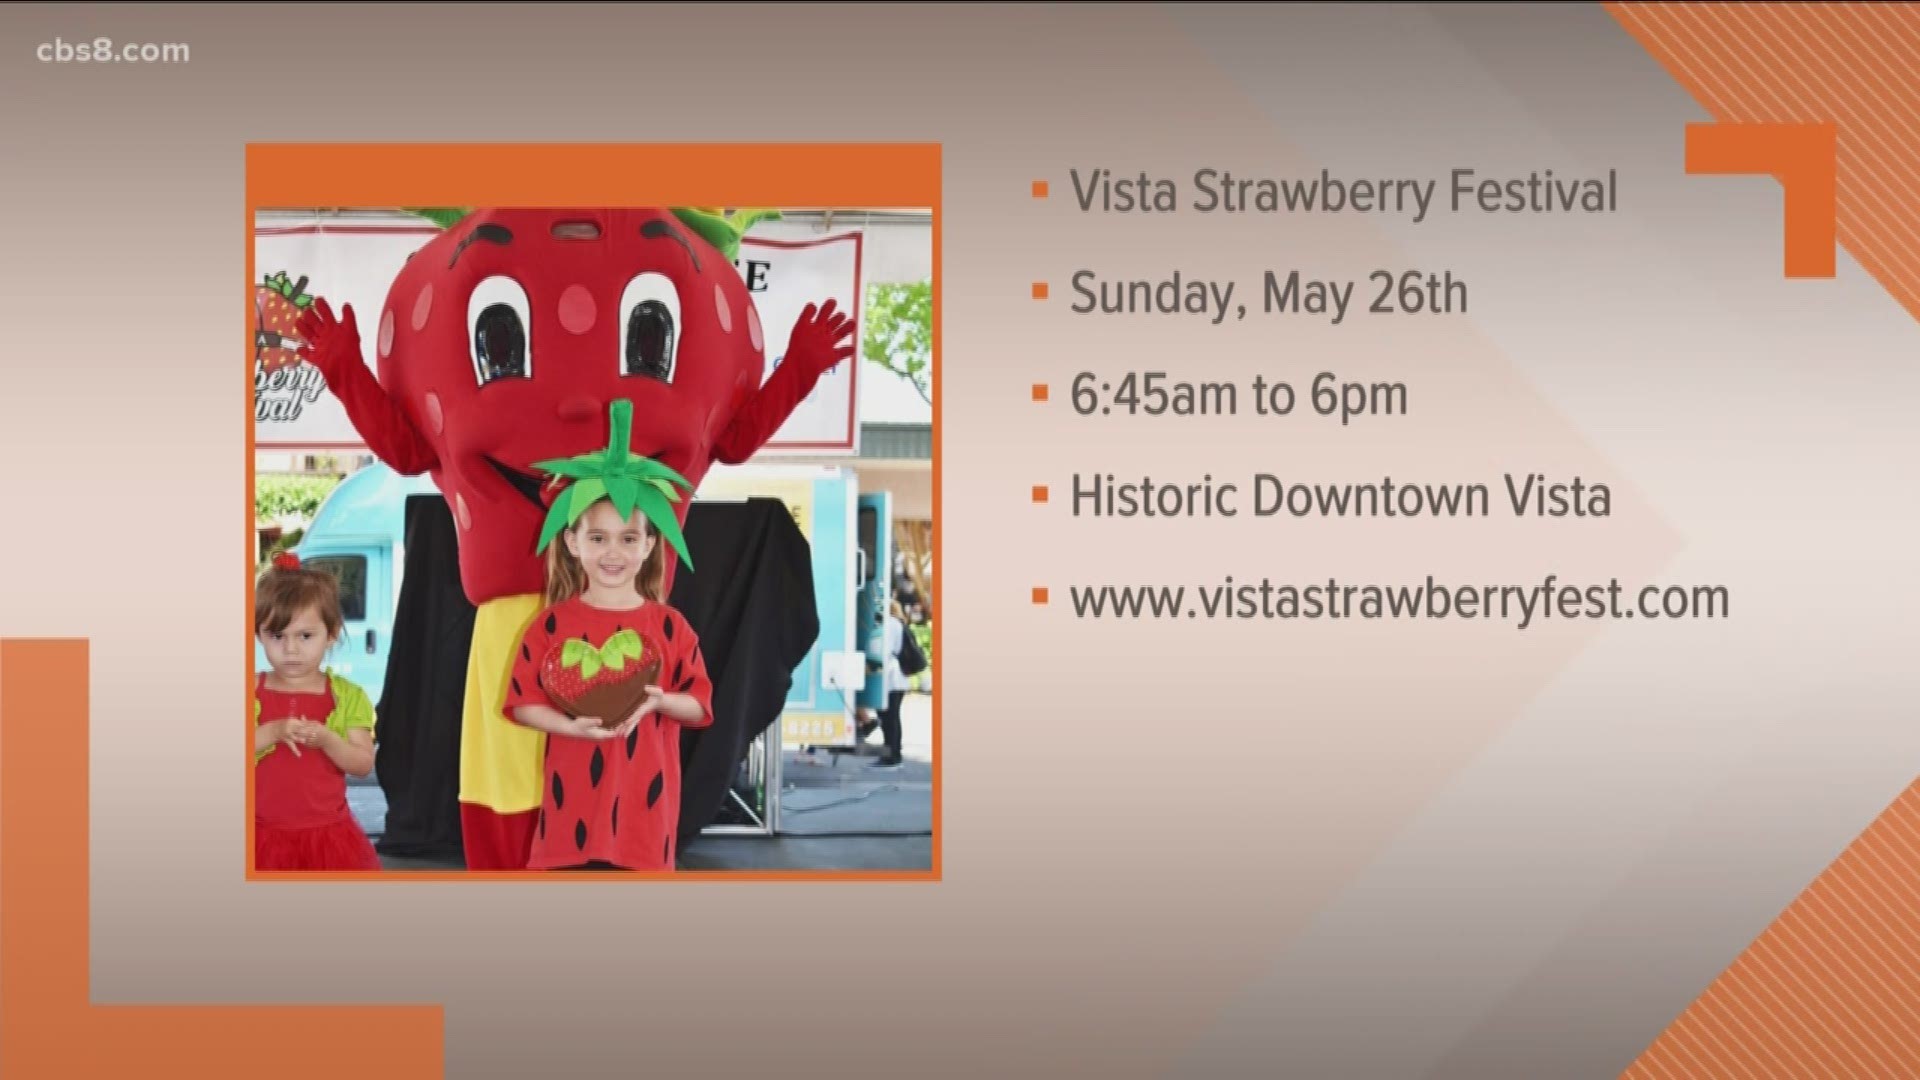 On Sunday, May 26, 2019 6:45am to 6:00pm in Historic Downtown Vista